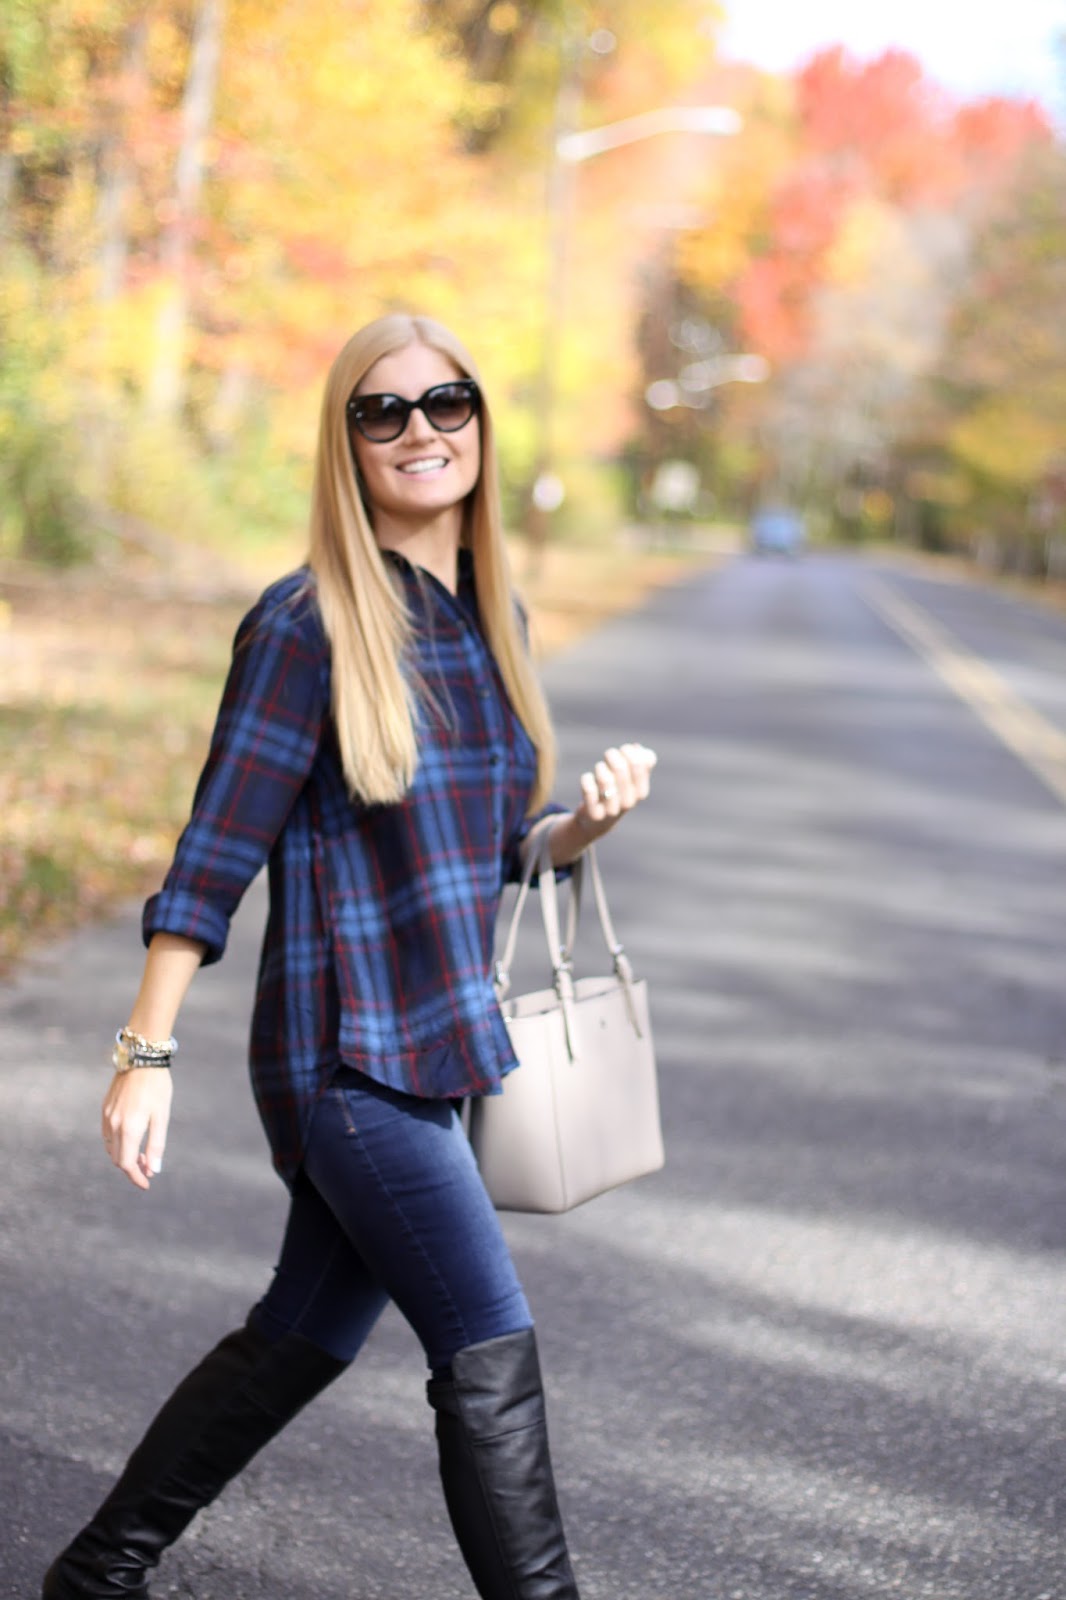 Shopping Bags and Travel Bags: Dressing Up a Plaid